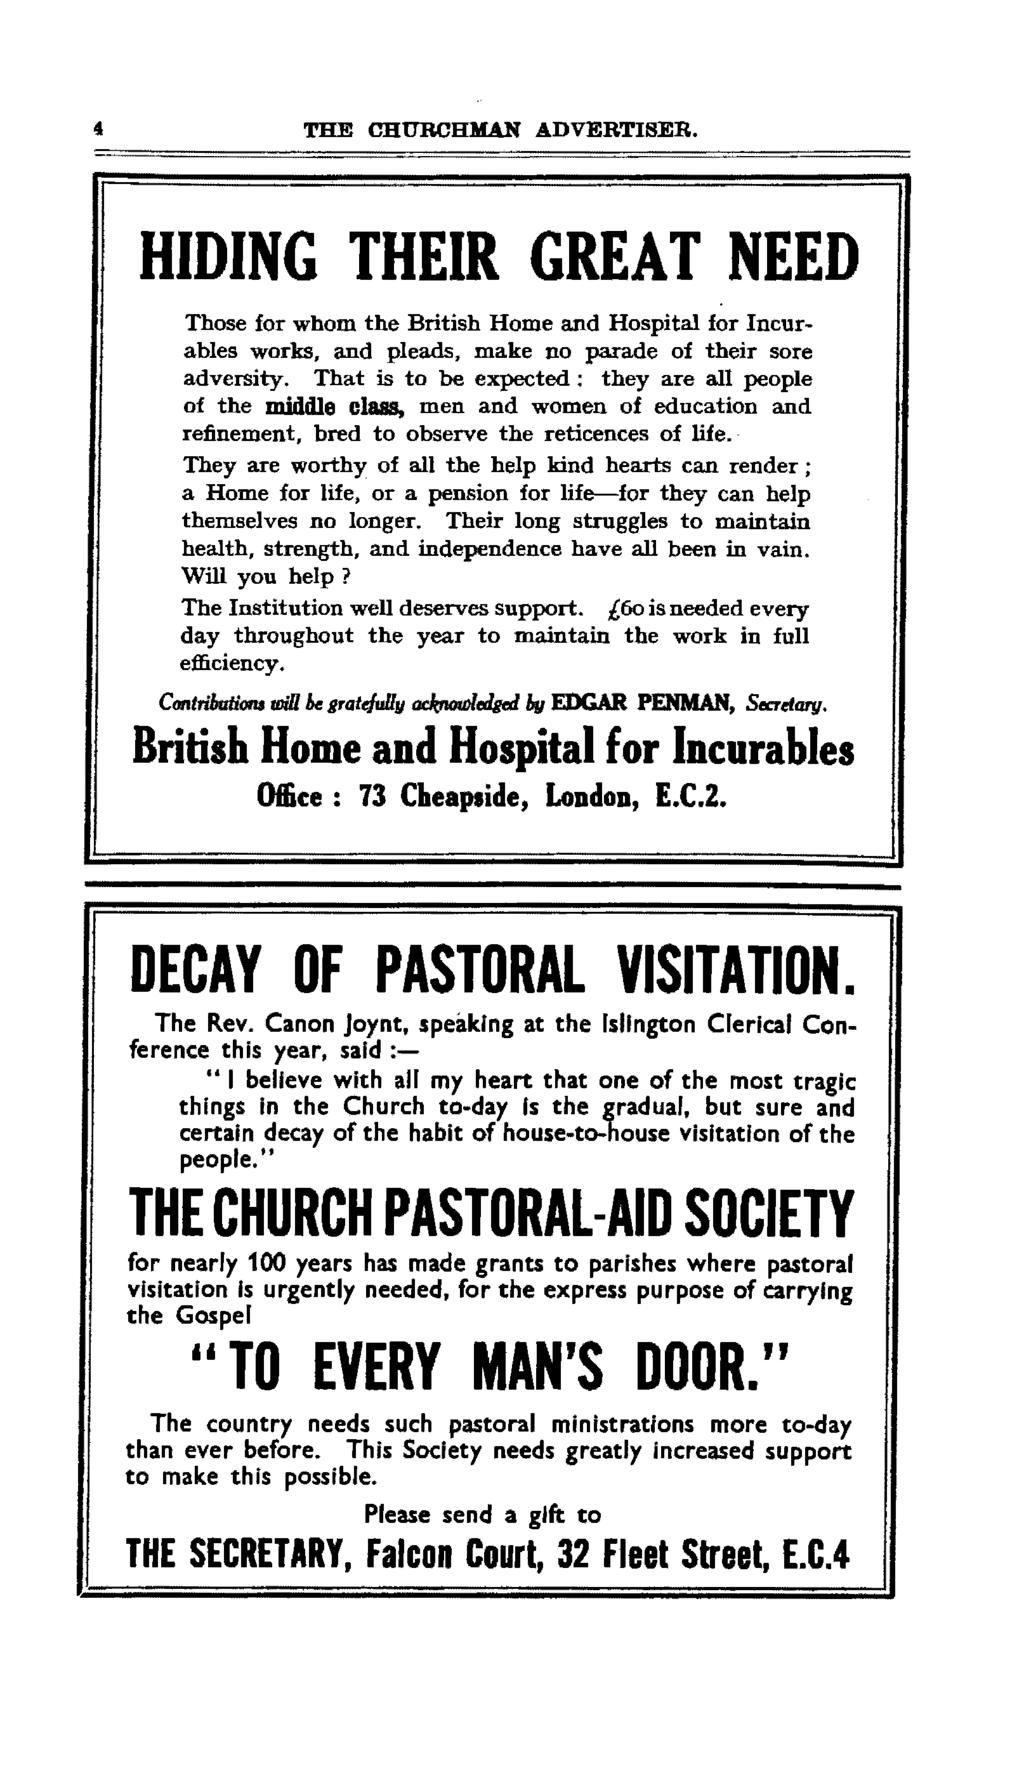 THE CHURCHMAN ADVERTSER. HDNG THER GREAT NEED Those for whom the British Home and Hospital for ncurables works, and pleads, make no parade of their sore adversity.